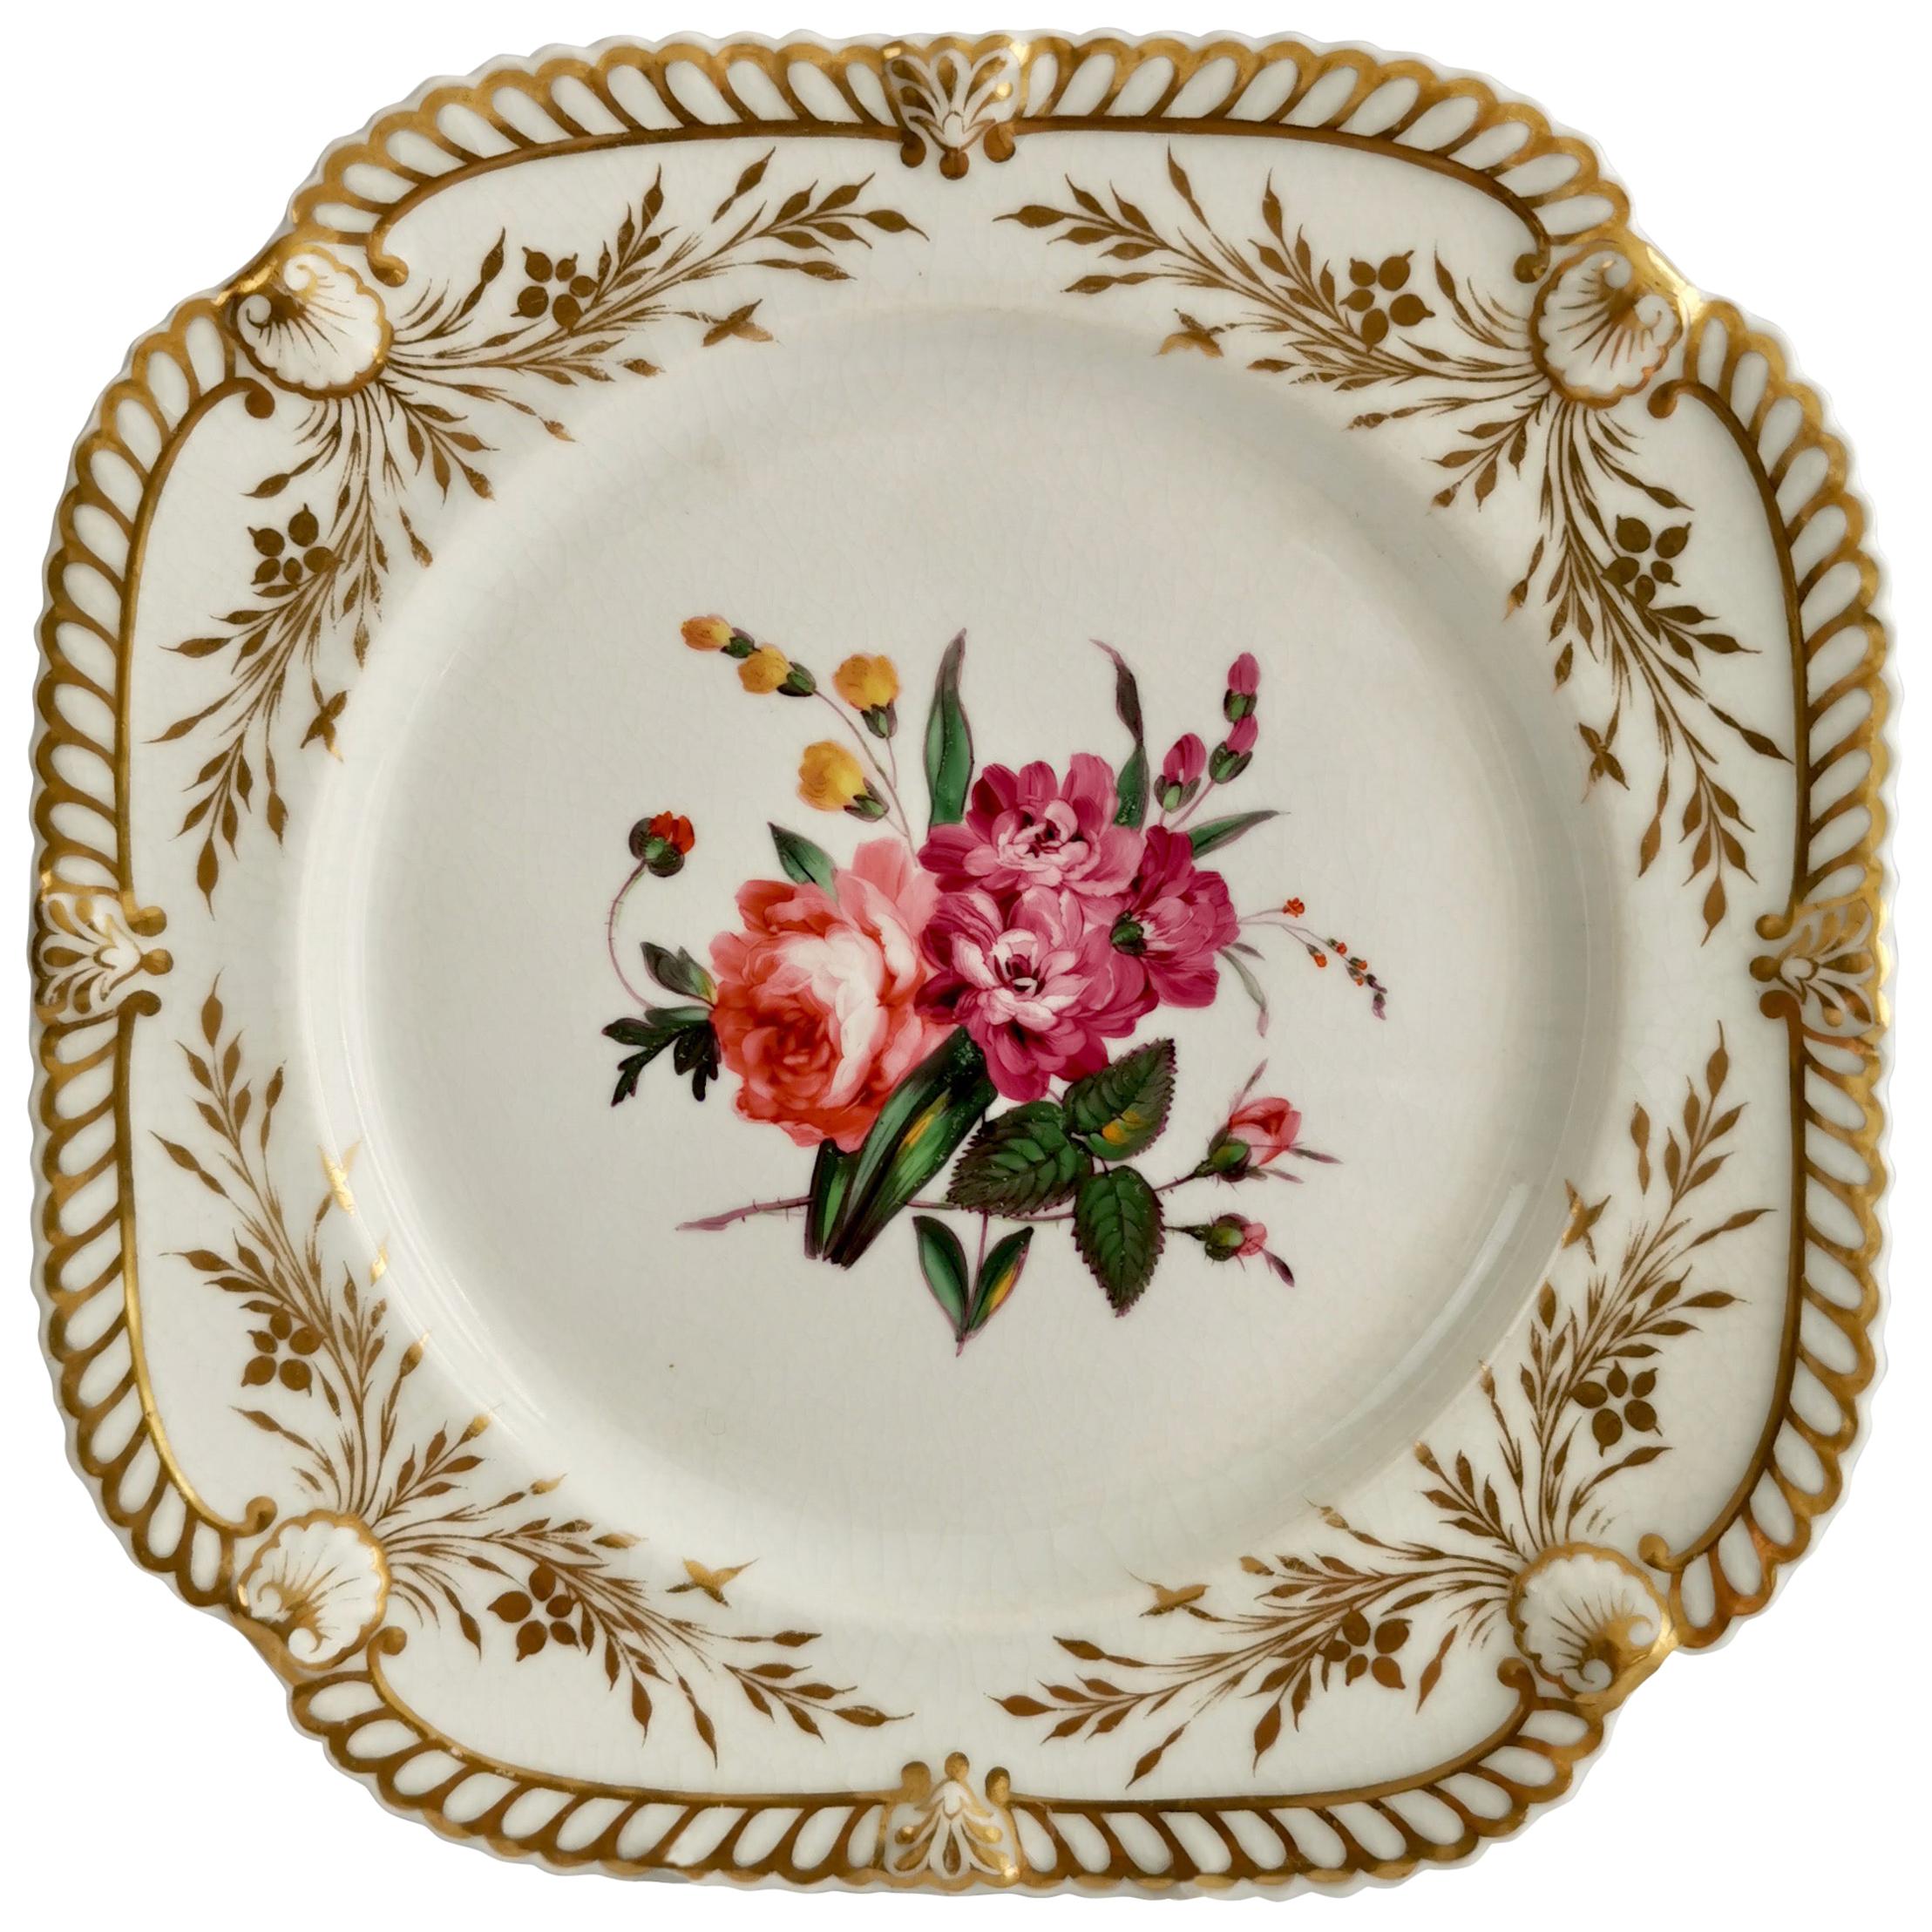 Porcelain Plate, Chamberlains Worcester, White with Flowers, Regency ca 1822 '2'